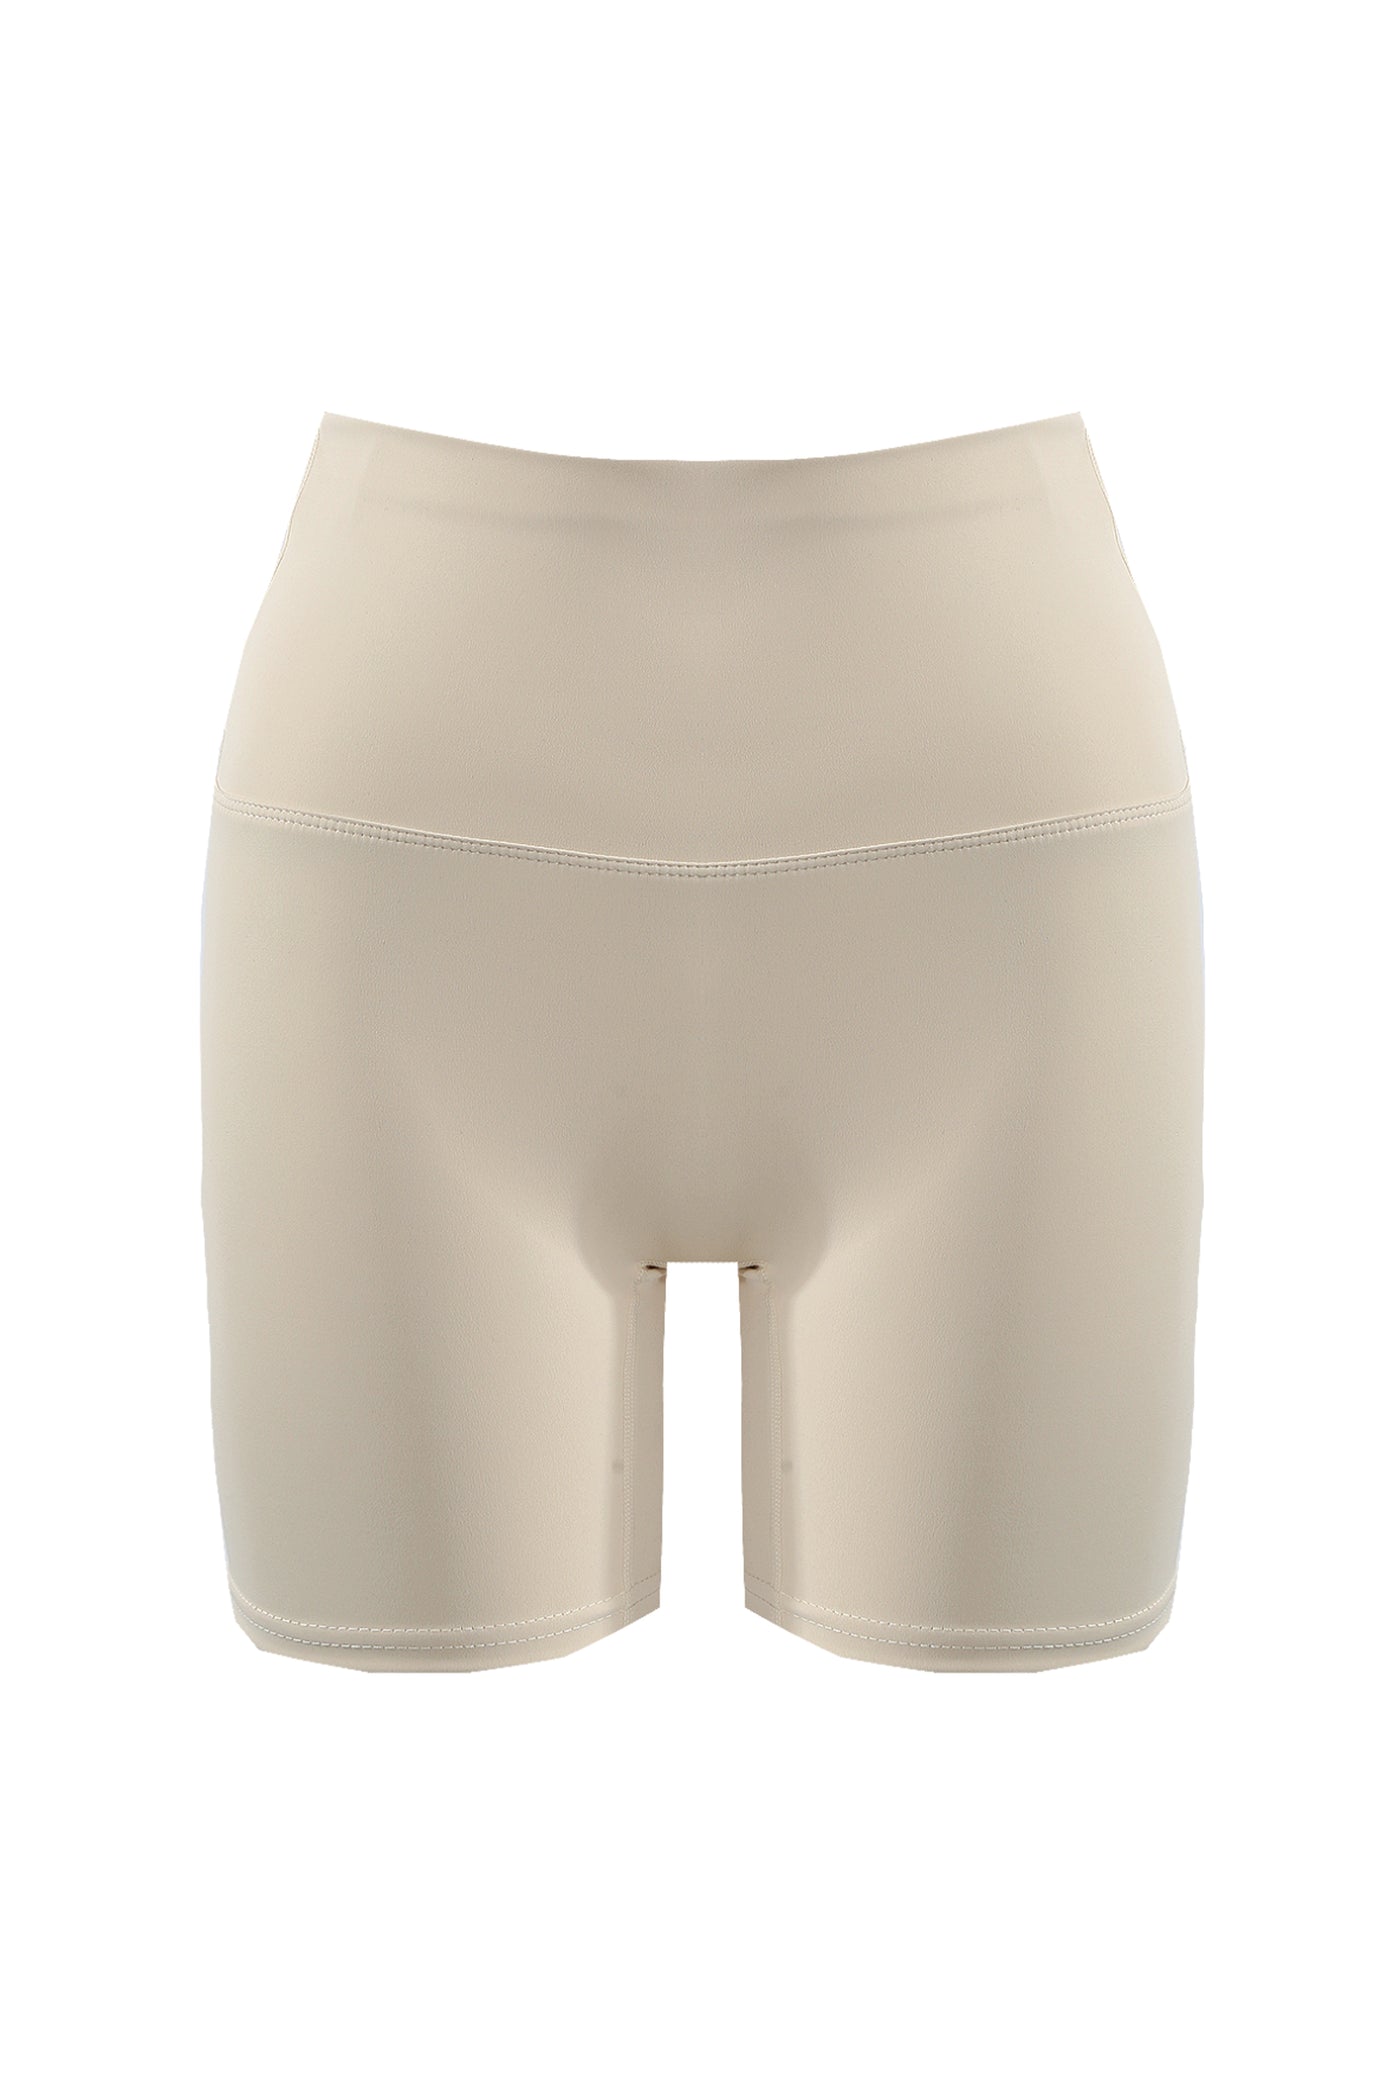 Slimming Cycling Shorts - Beige